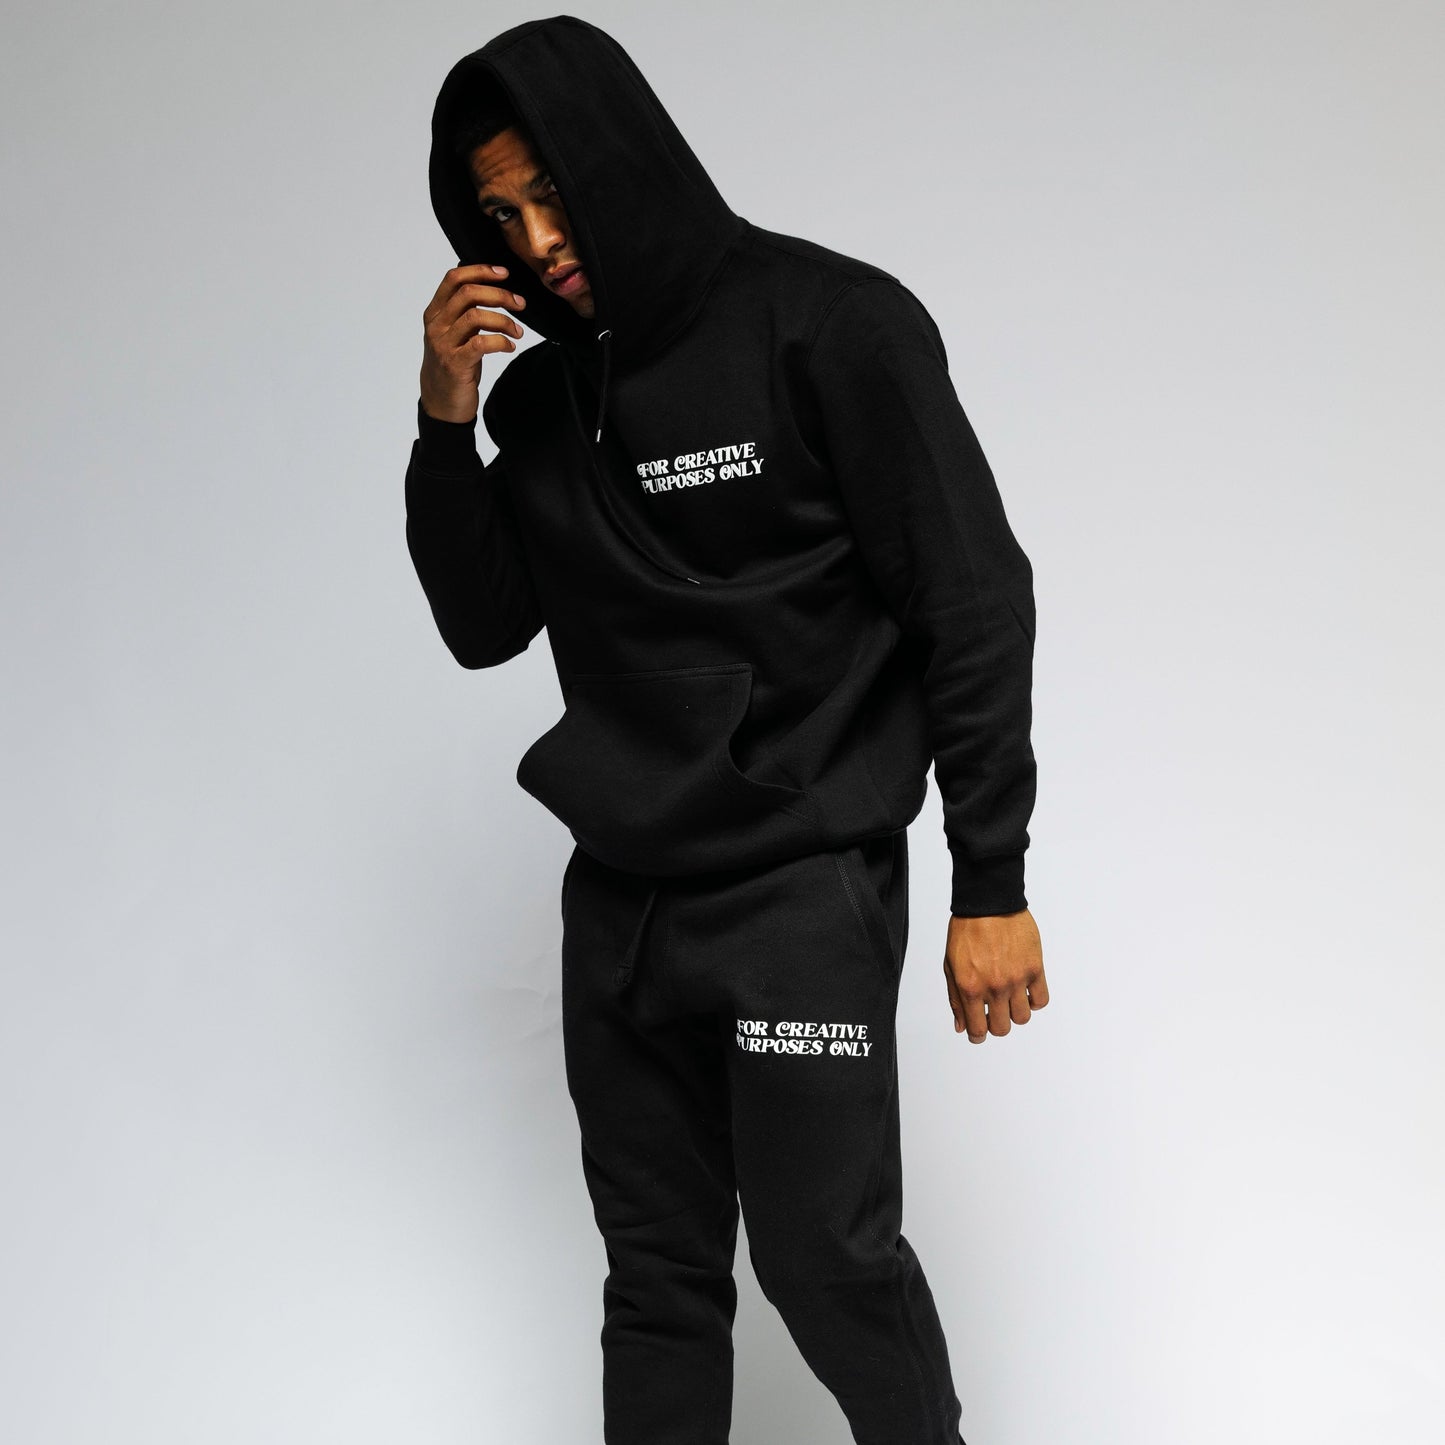 "For Creative Purposes Only" Puff Print Sweatsuit (BLACK) - For The Crew Clothing Outerwear